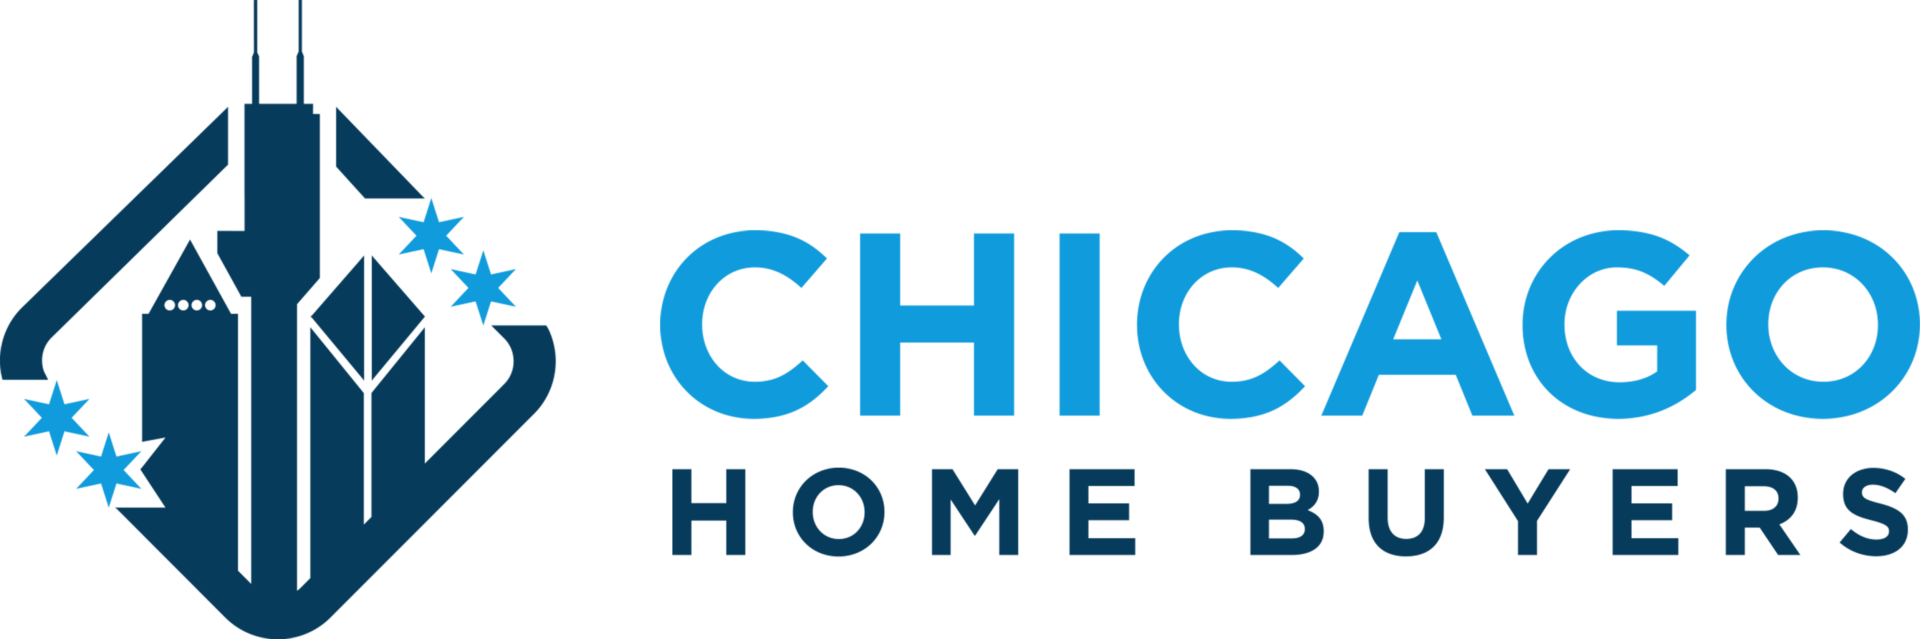 Chicago Home Buyers logo